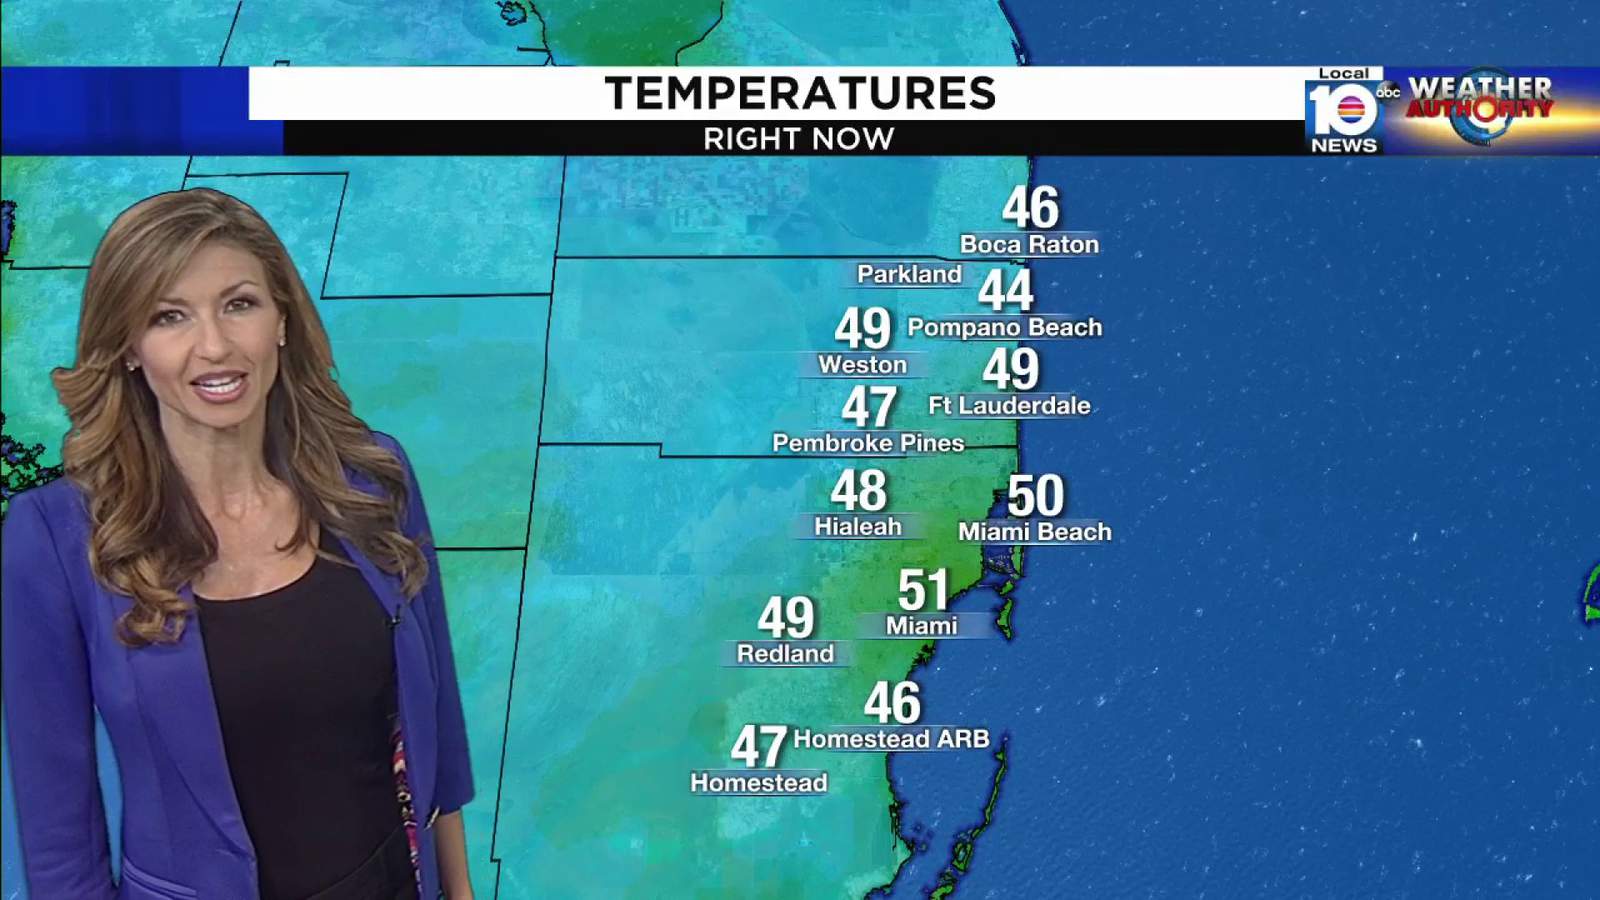 South Florida is bracing for the coldest night of the year